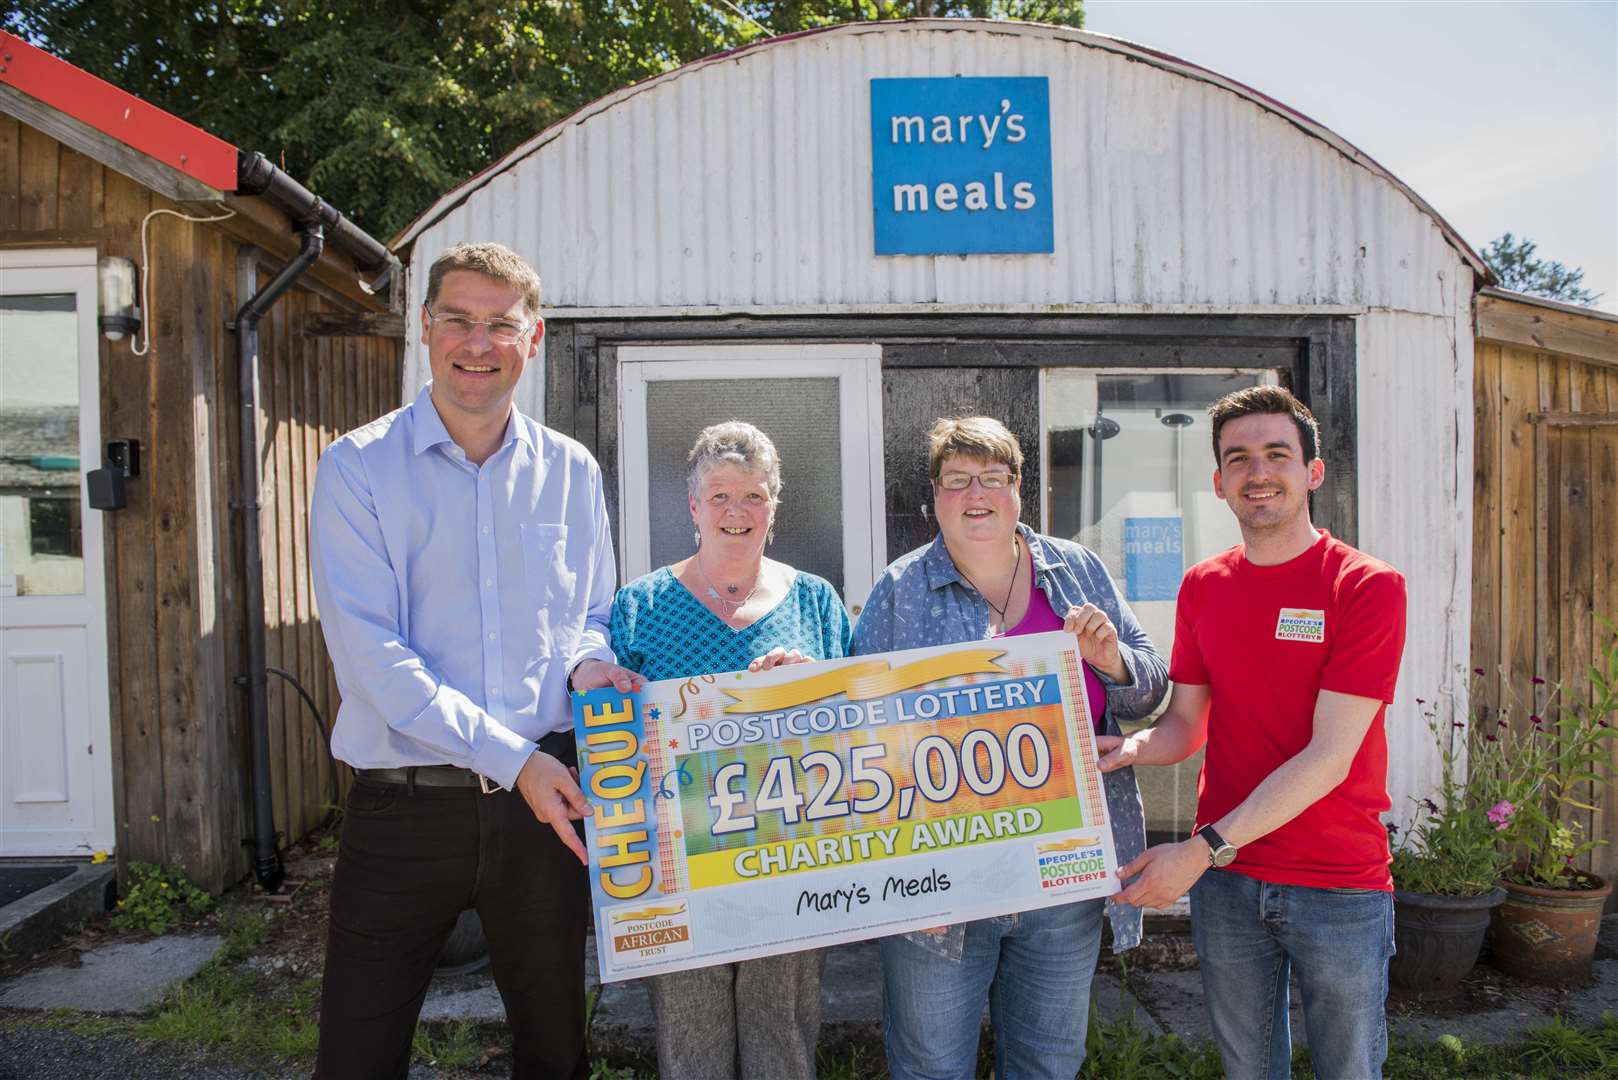 Mary’s Meals co-founder Magnus MacFarlane-Barrow, left, will also receive an honorary degree from the university (Chriss Watt/Mary’s Meals UK/PA)